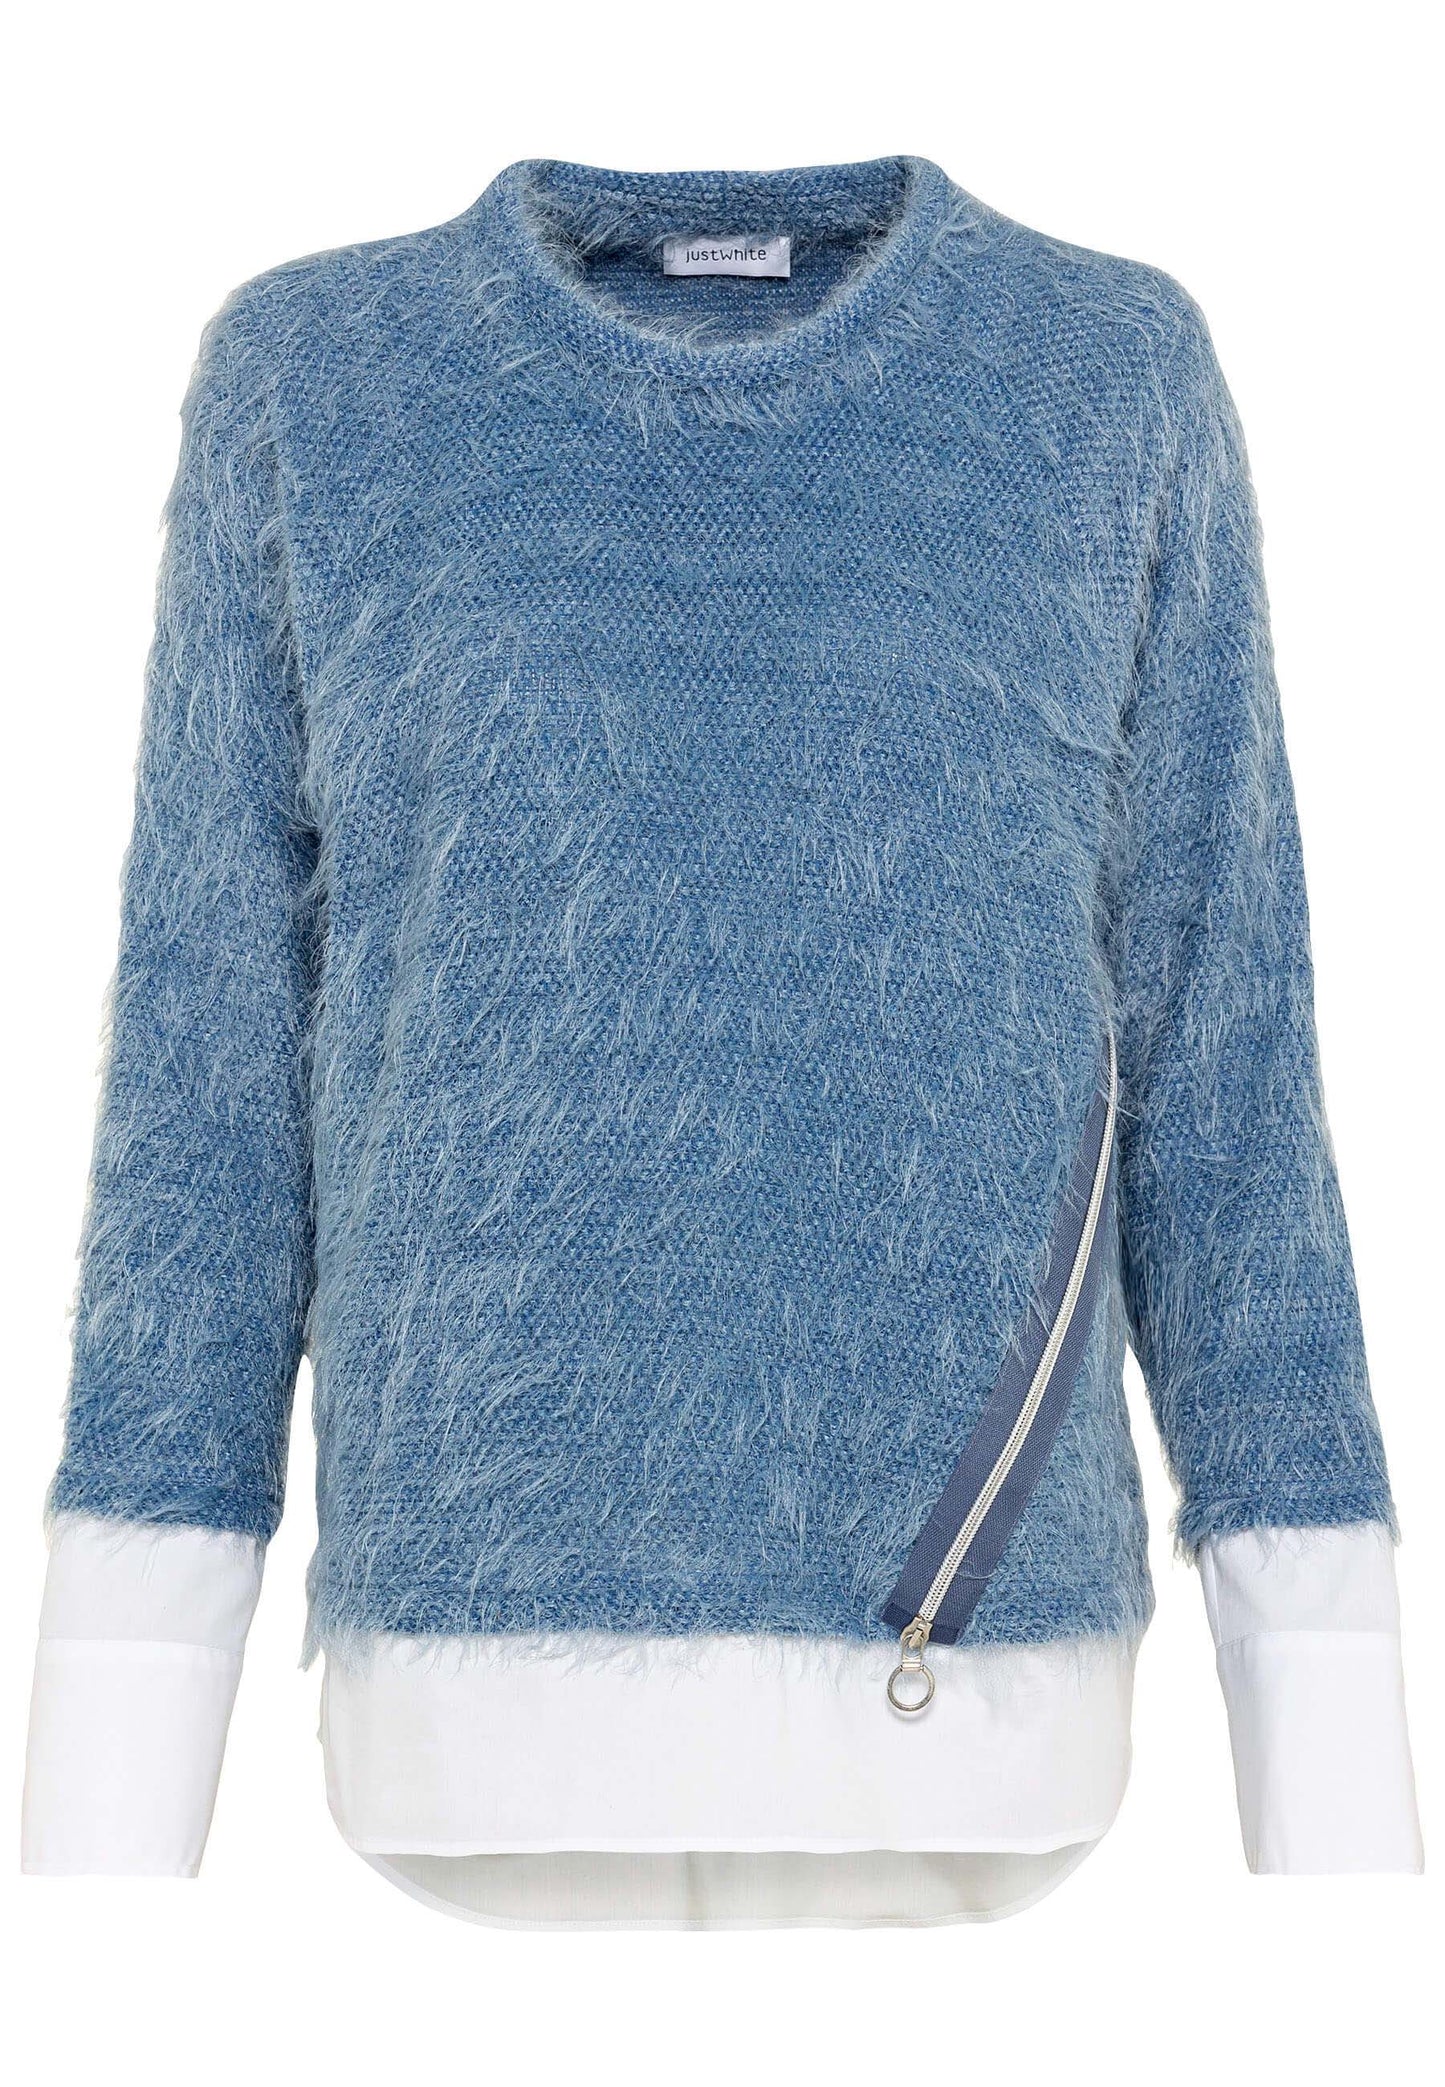 SE Just White Hairy Knit Sweater